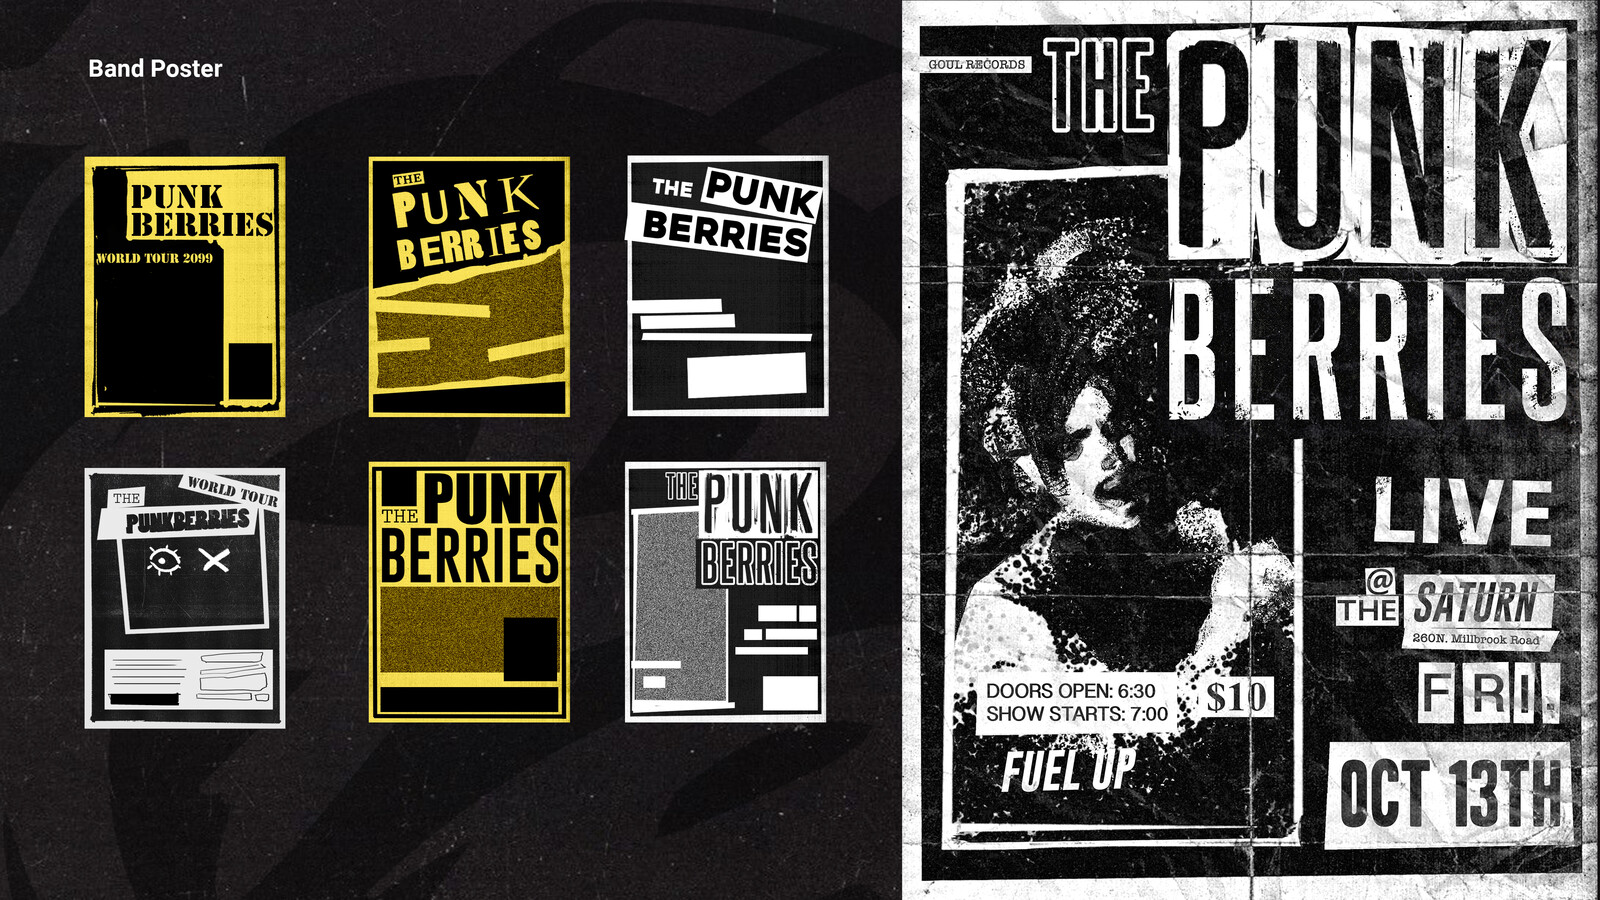 The Punkberries - Band Poster